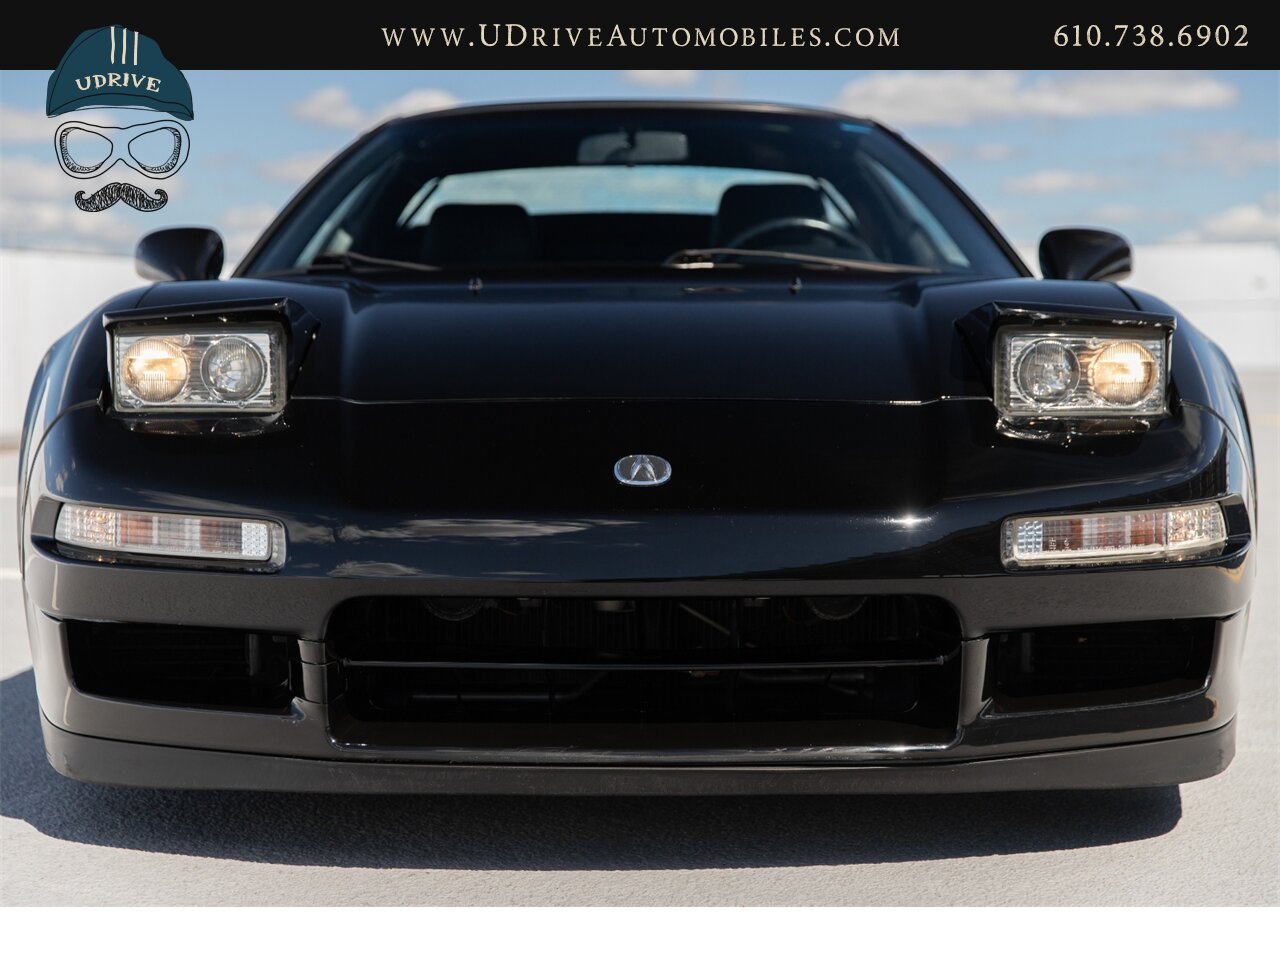 1996 Acura NSX NSX-T  5 Speed Manual Fresh Timing Belt Service - Photo 16 - West Chester, PA 19382